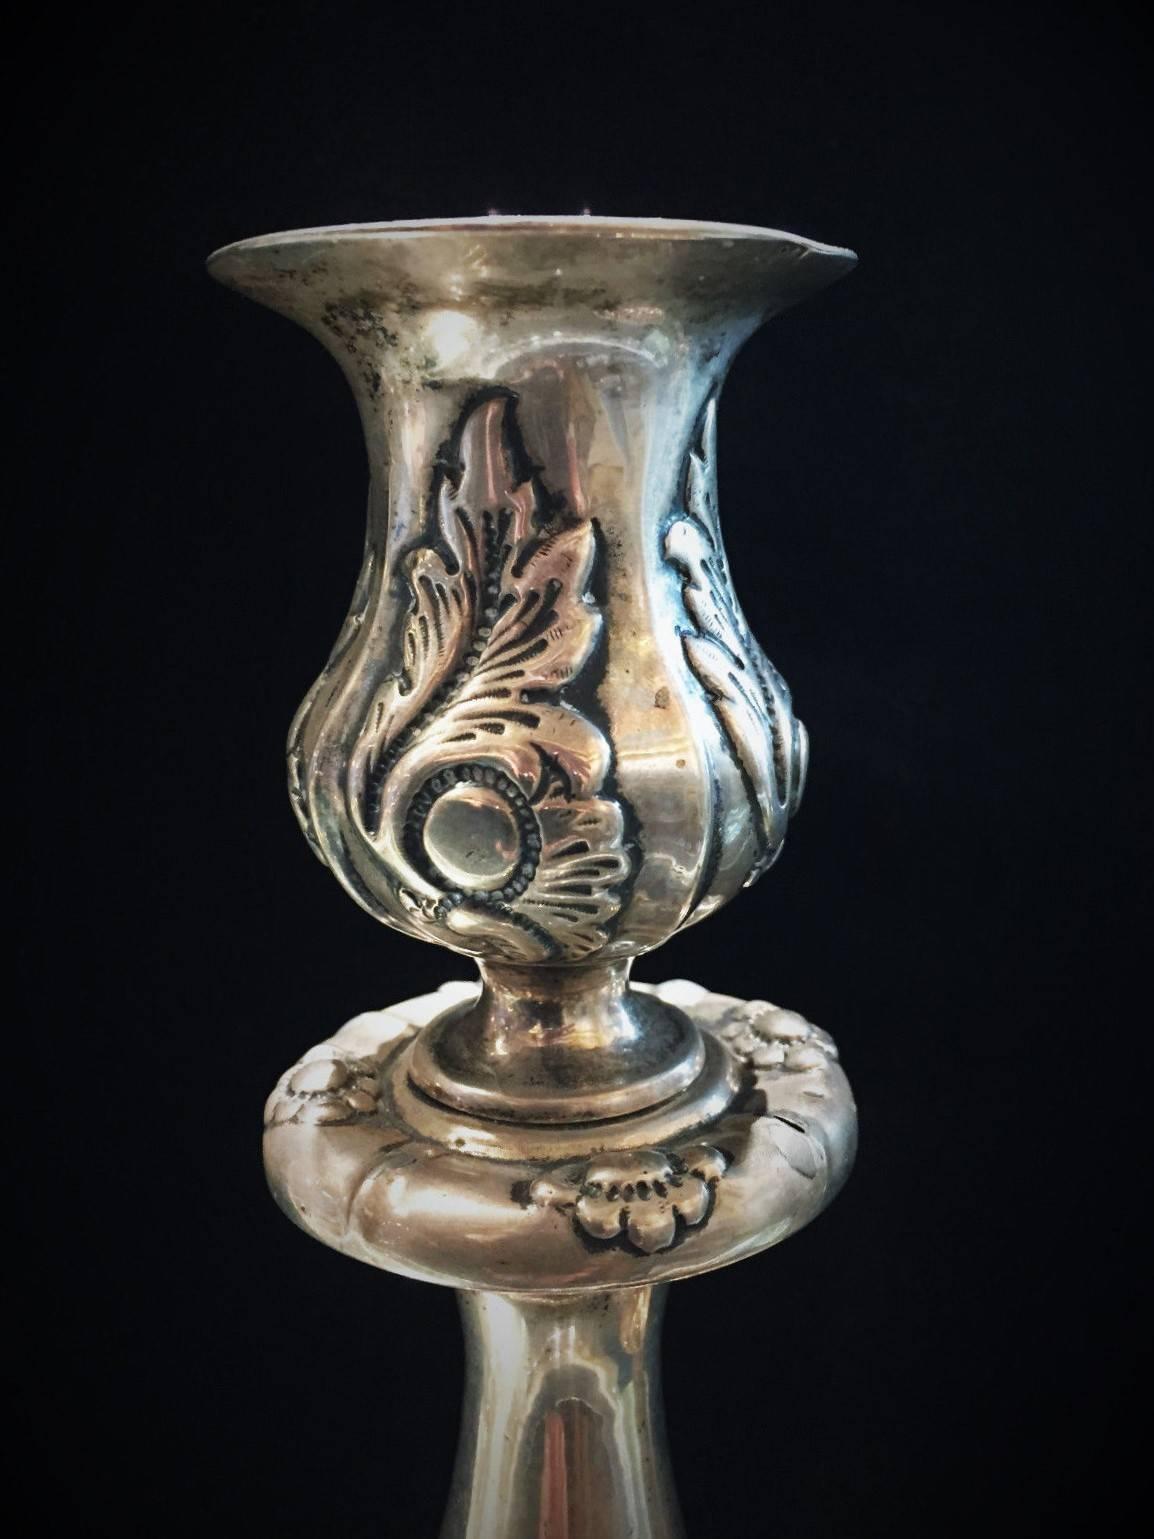 The scroll and floral decorations covering the base, stem and candle cup are finely crafted in the repoussé and chasing techniques.

Weight of each candlestick: 14.43 oz. / 461 g

Both candlesticks are fully hallmarked:
• 84° Russian silver